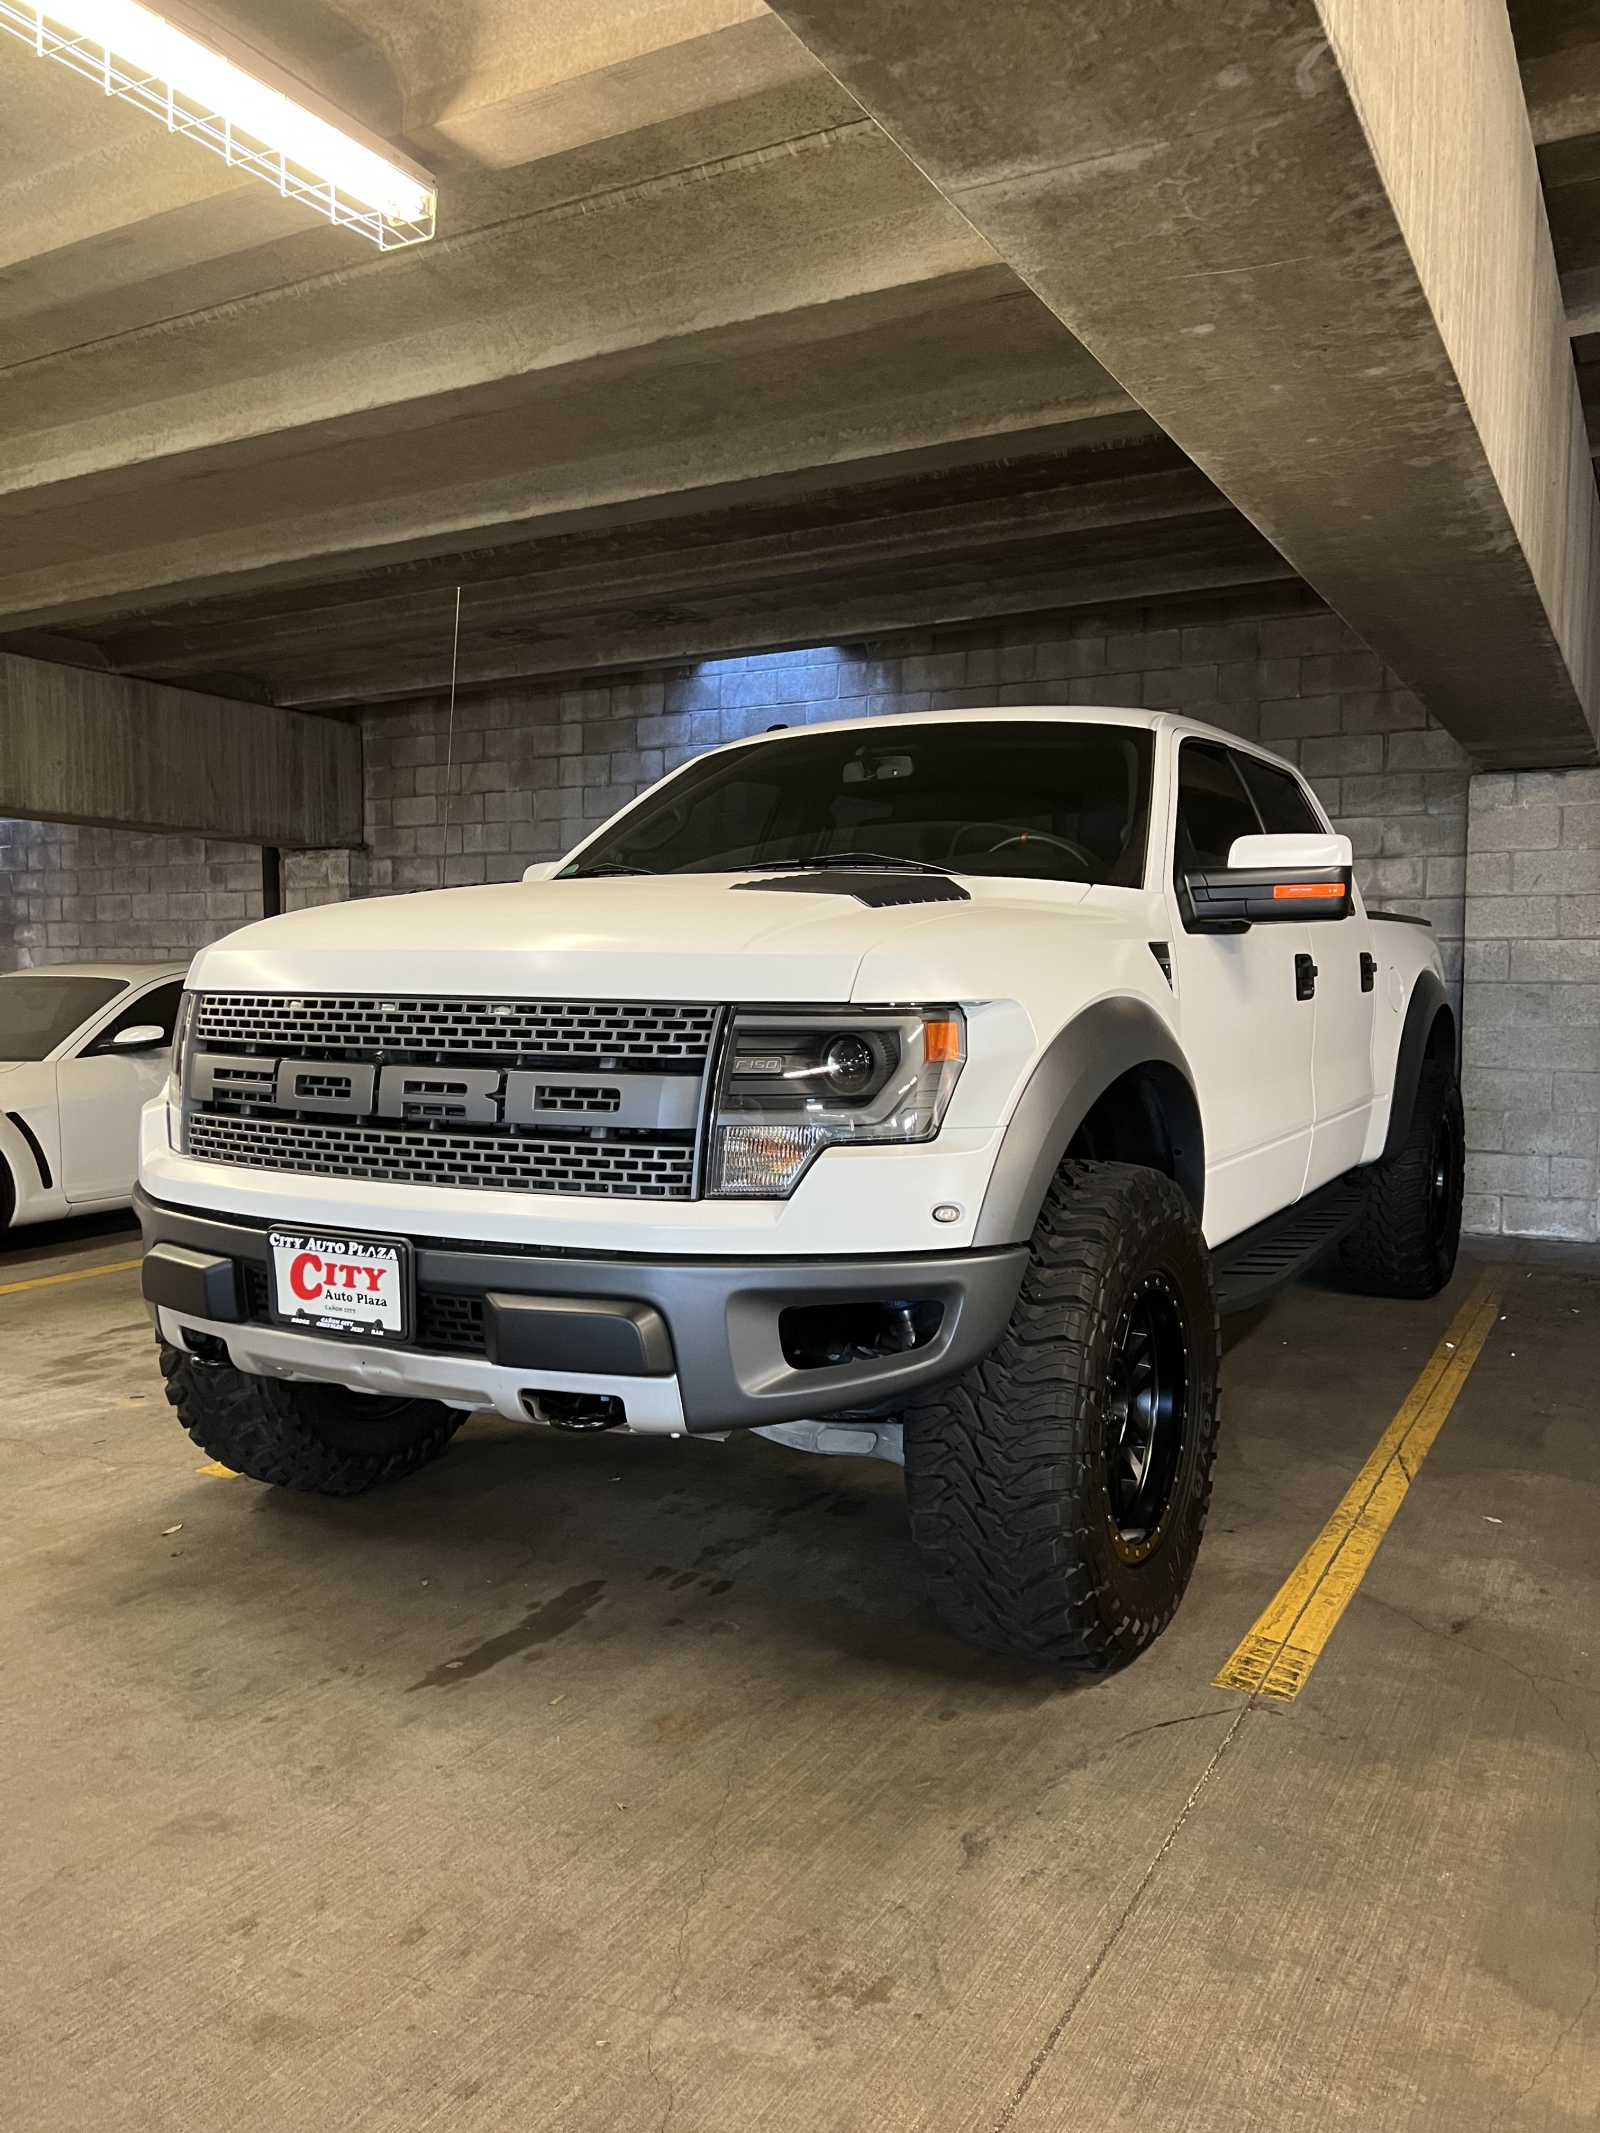 For Sale: PRICE DROP! | 2014 Ford SVT Raptor | ONLY 8,050 MILES!!! - photo0